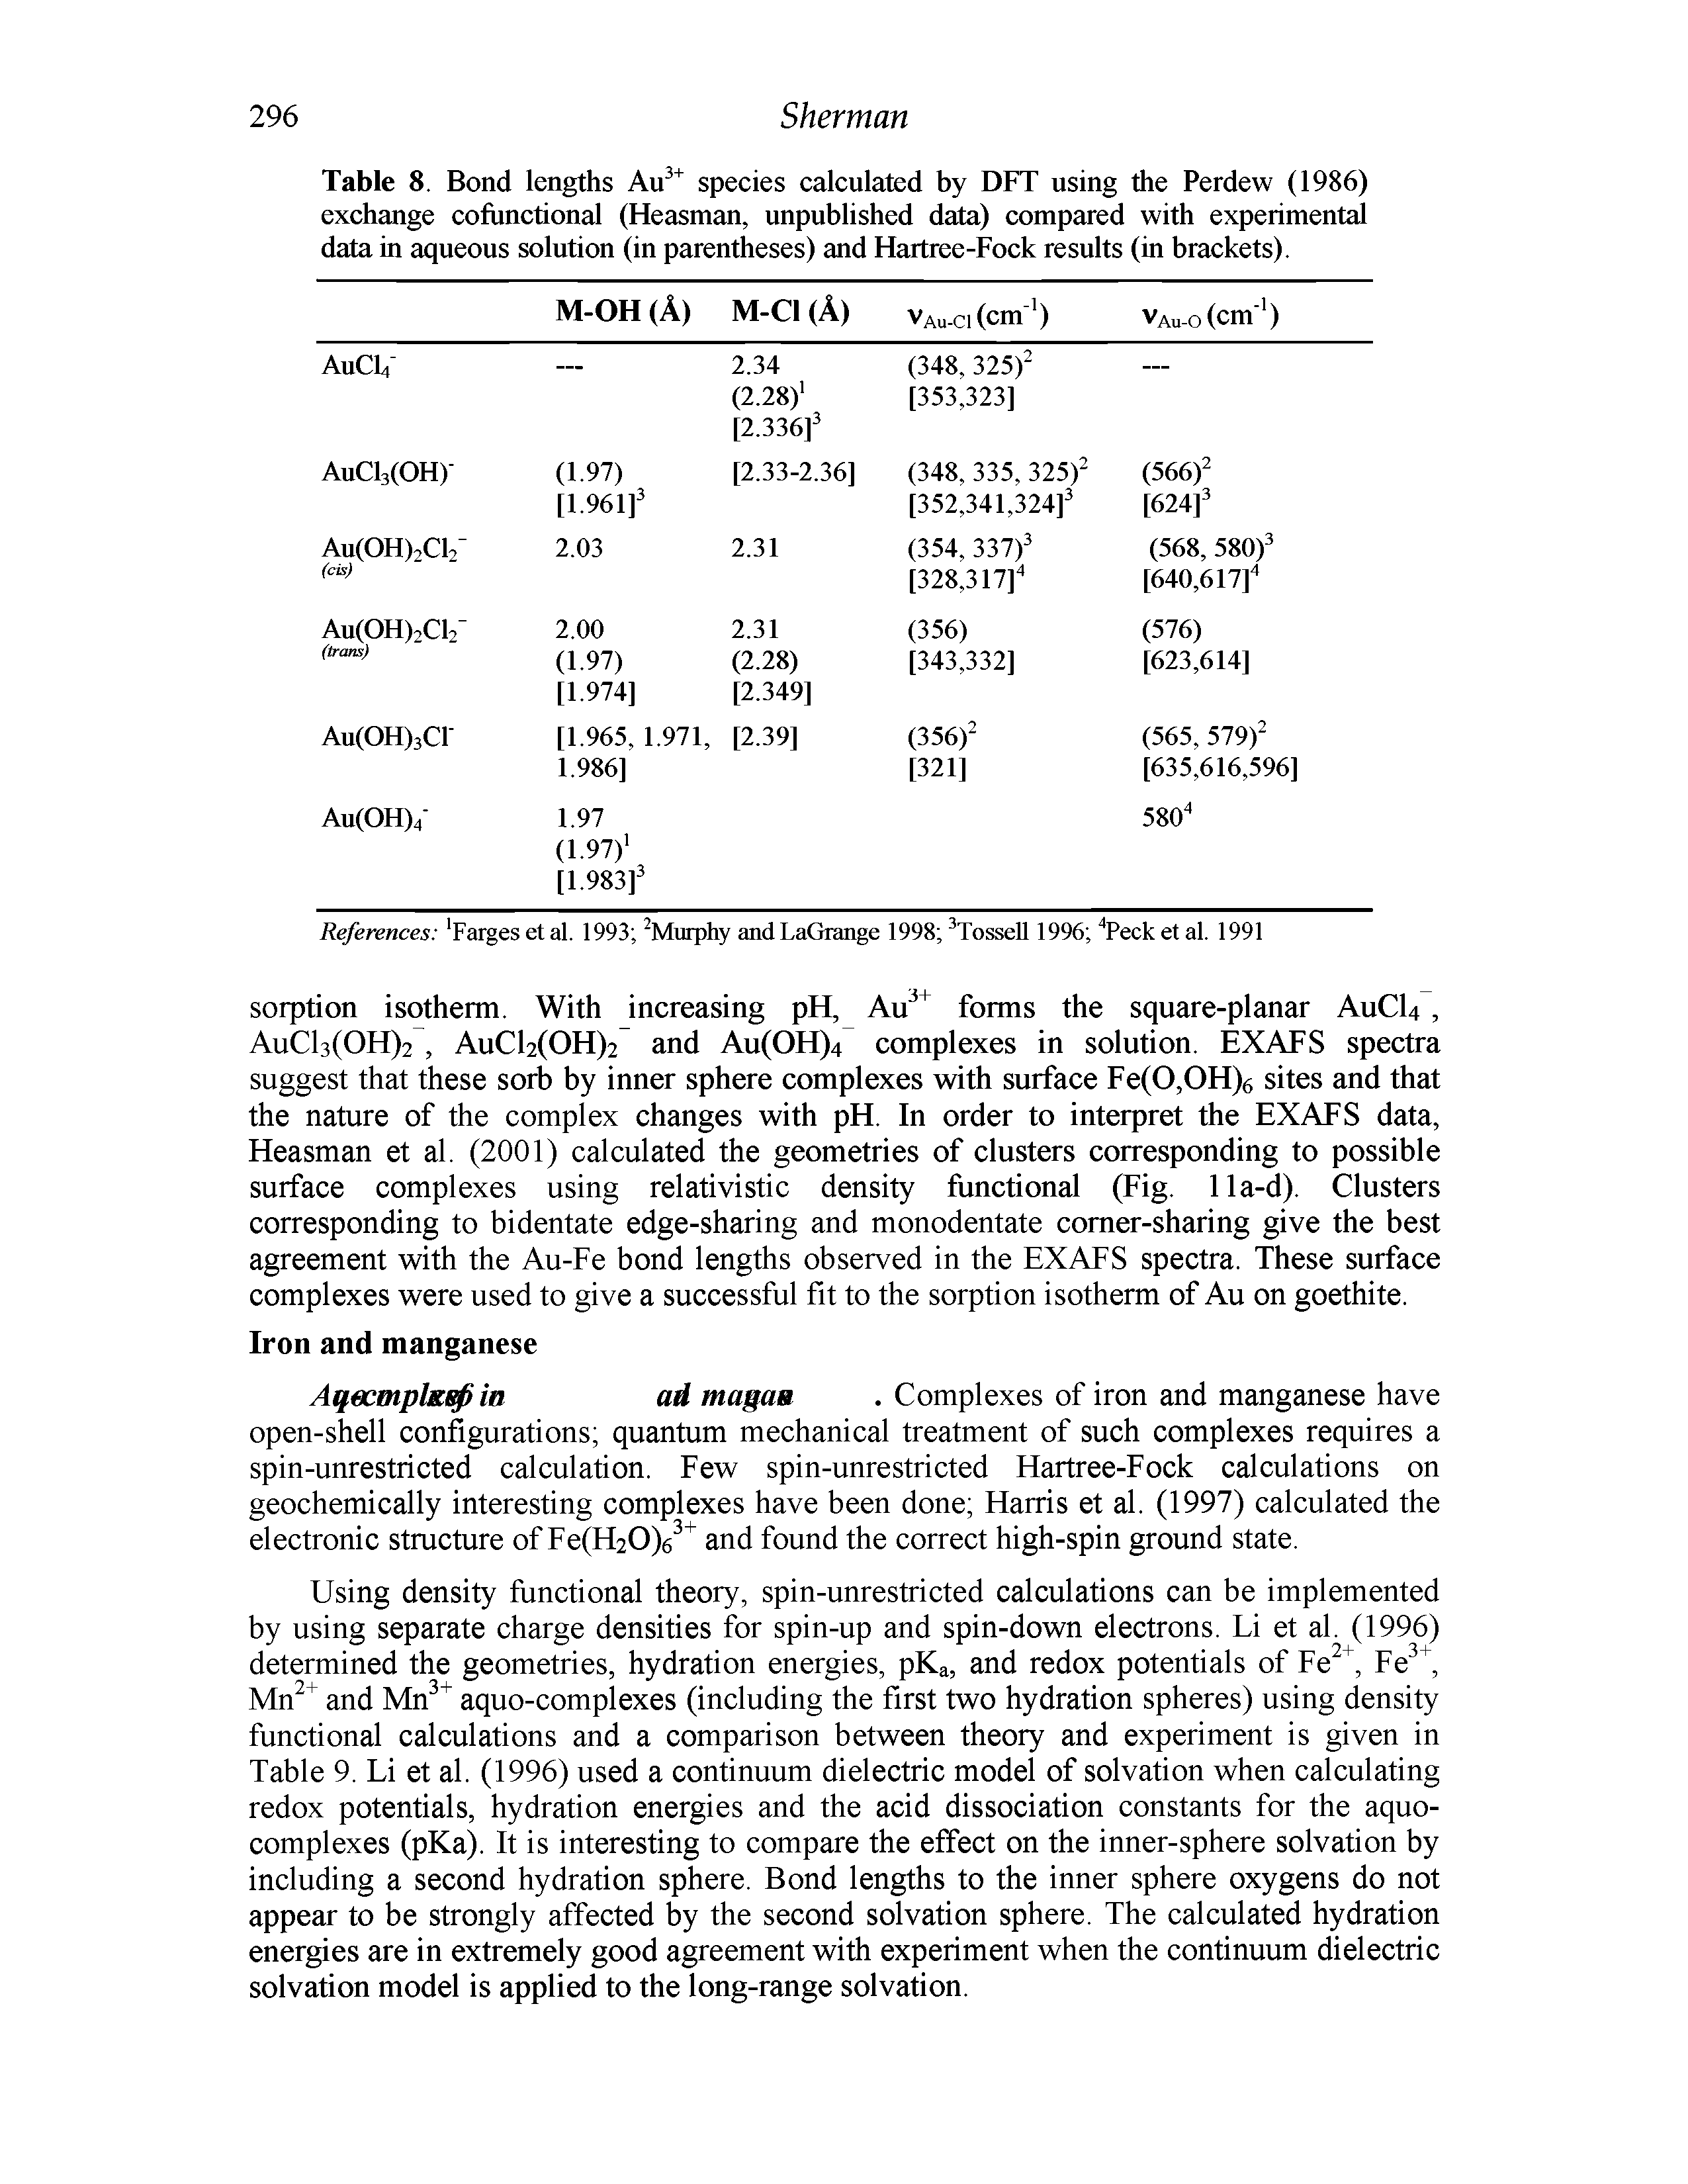 Table 8. Bond lengths species calculated by DFT using the Perdew (1986) exchange cofiinctional (Heasman, unpublished data) compared with experimental data in aqueous solution (in parentheses) and Hartree-Fock results (in brackets).